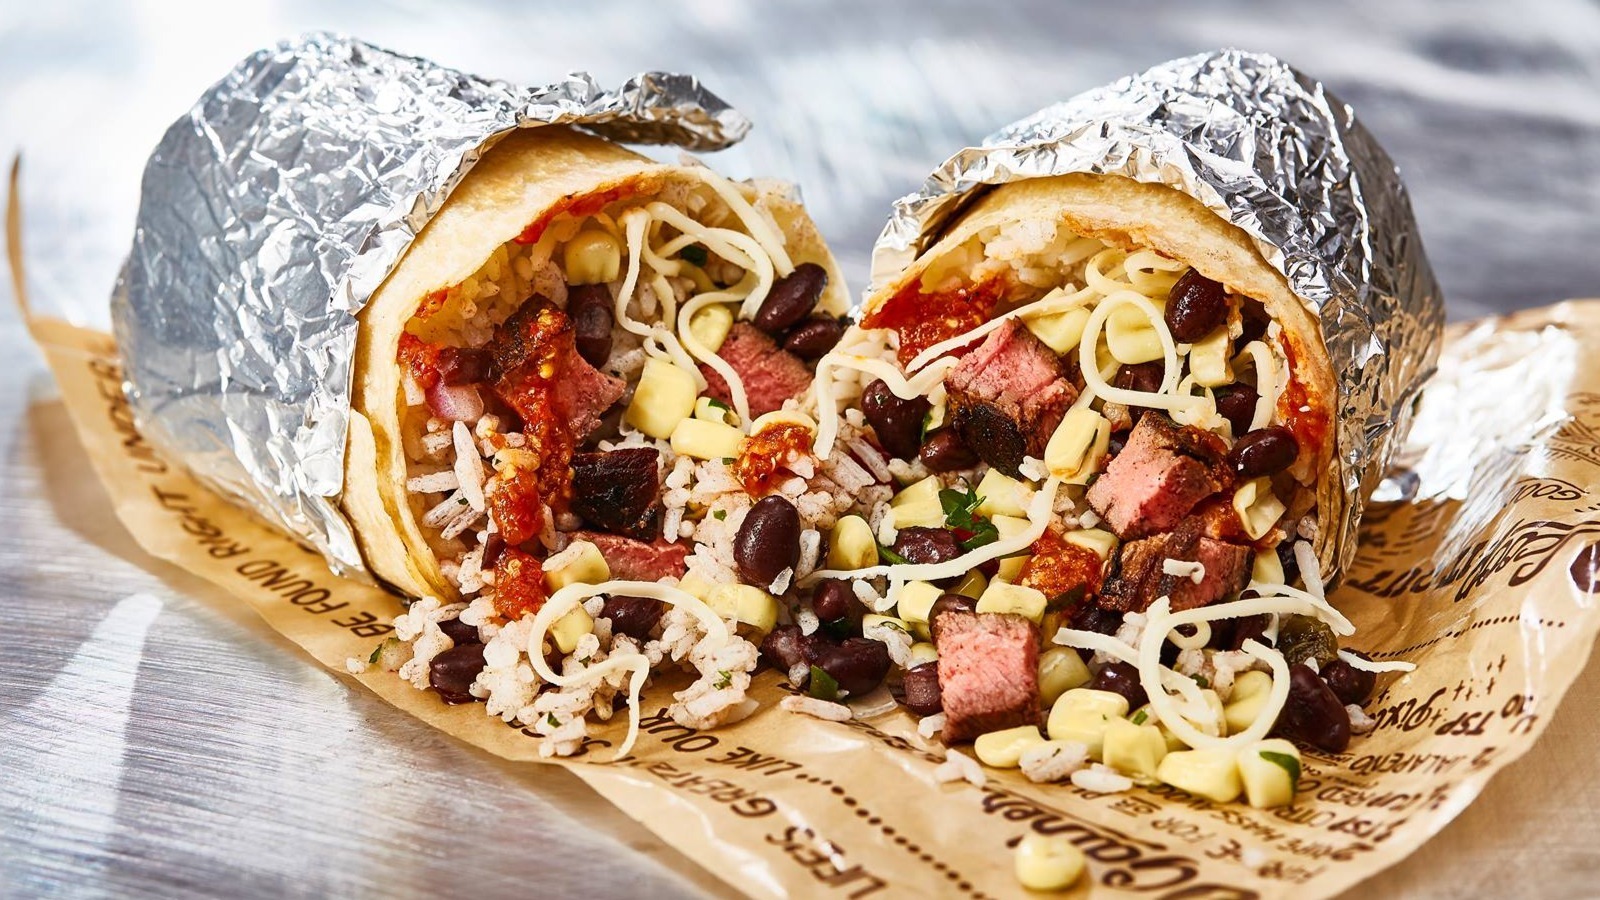 Chipotle Is Giving Away Thousands Of Free Burritos — Here's How To Get One